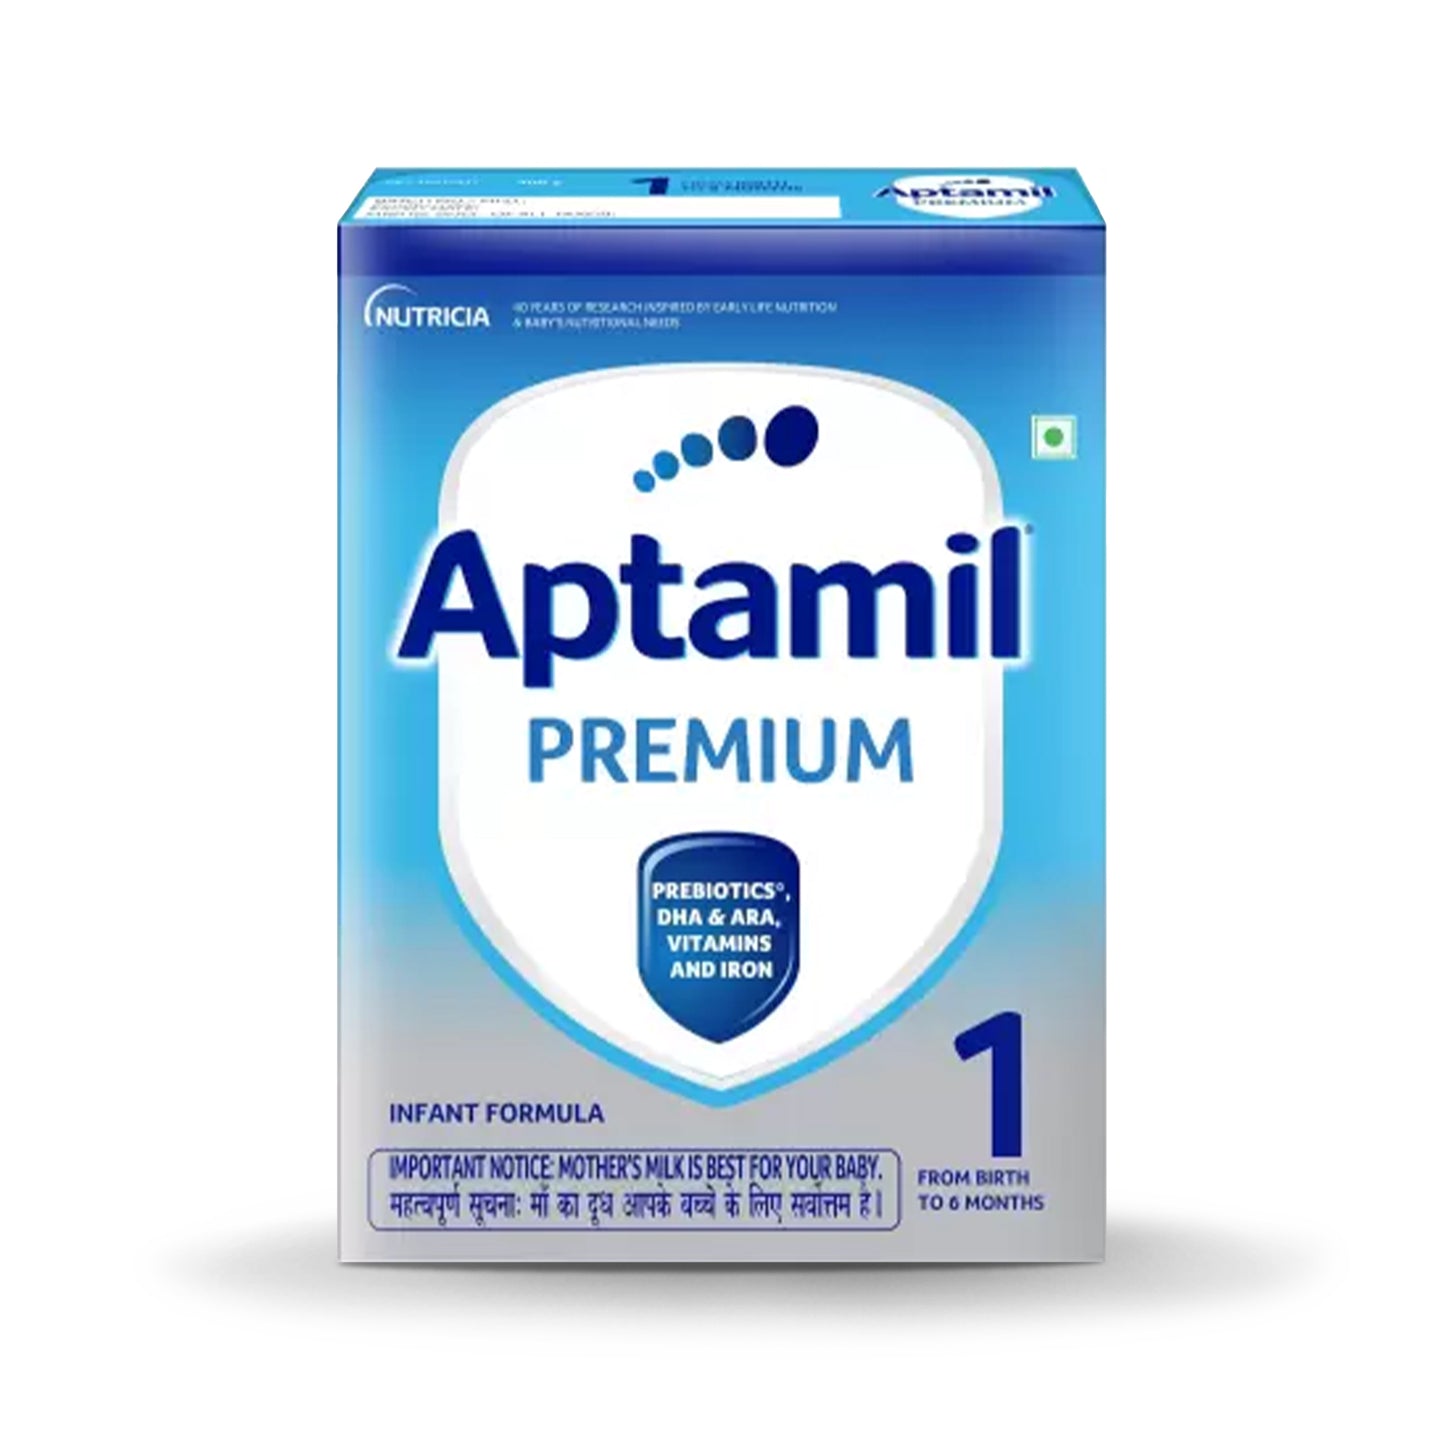 Aptamil Premium 1 Infant Formula From Birth to 6 Months - Refill, 400gm